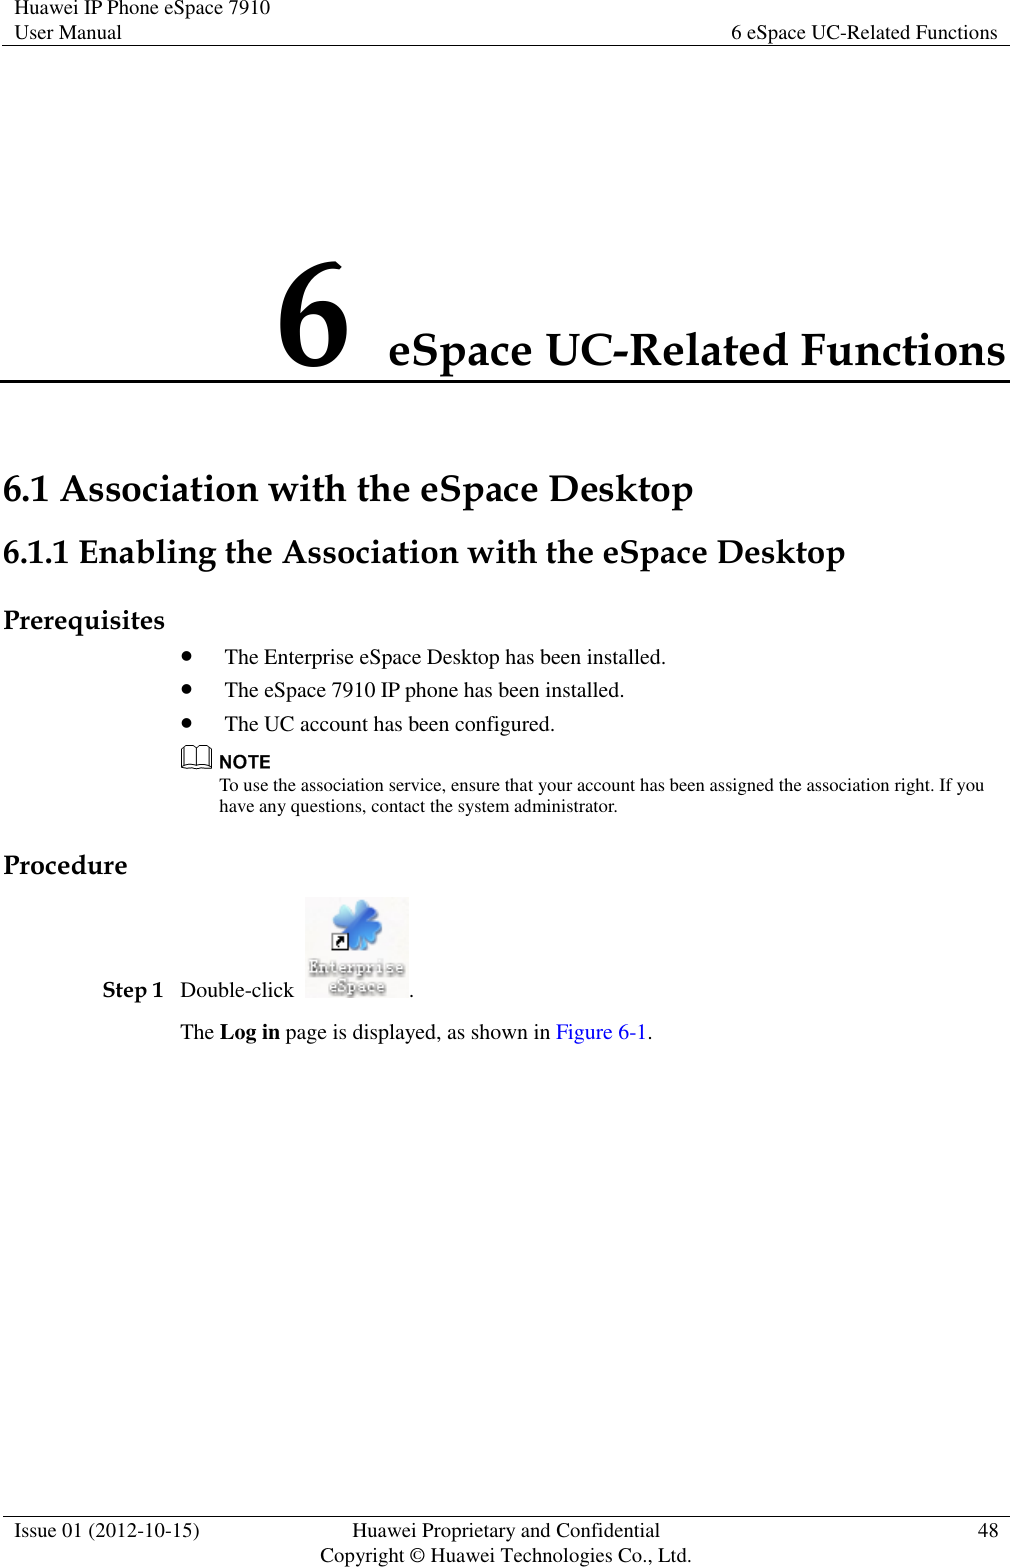 Huawei IP Phone eSpace 7910 User Manual 6 eSpace UC-Related Functions  Issue 01 (2012-10-15) Huawei Proprietary and Confidential                                     Copyright © Huawei Technologies Co., Ltd. 48  6 eSpace UC-Related Functions 6.1 Association with the eSpace Desktop 6.1.1 Enabling the Association with the eSpace Desktop Prerequisites  The Enterprise eSpace Desktop has been installed.  The eSpace 7910 IP phone has been installed.  The UC account has been configured.  To use the association service, ensure that your account has been assigned the association right. If you have any questions, contact the system administrator. Procedure Step 1 Double-click  . The Log in page is displayed, as shown in Figure 6-1. 